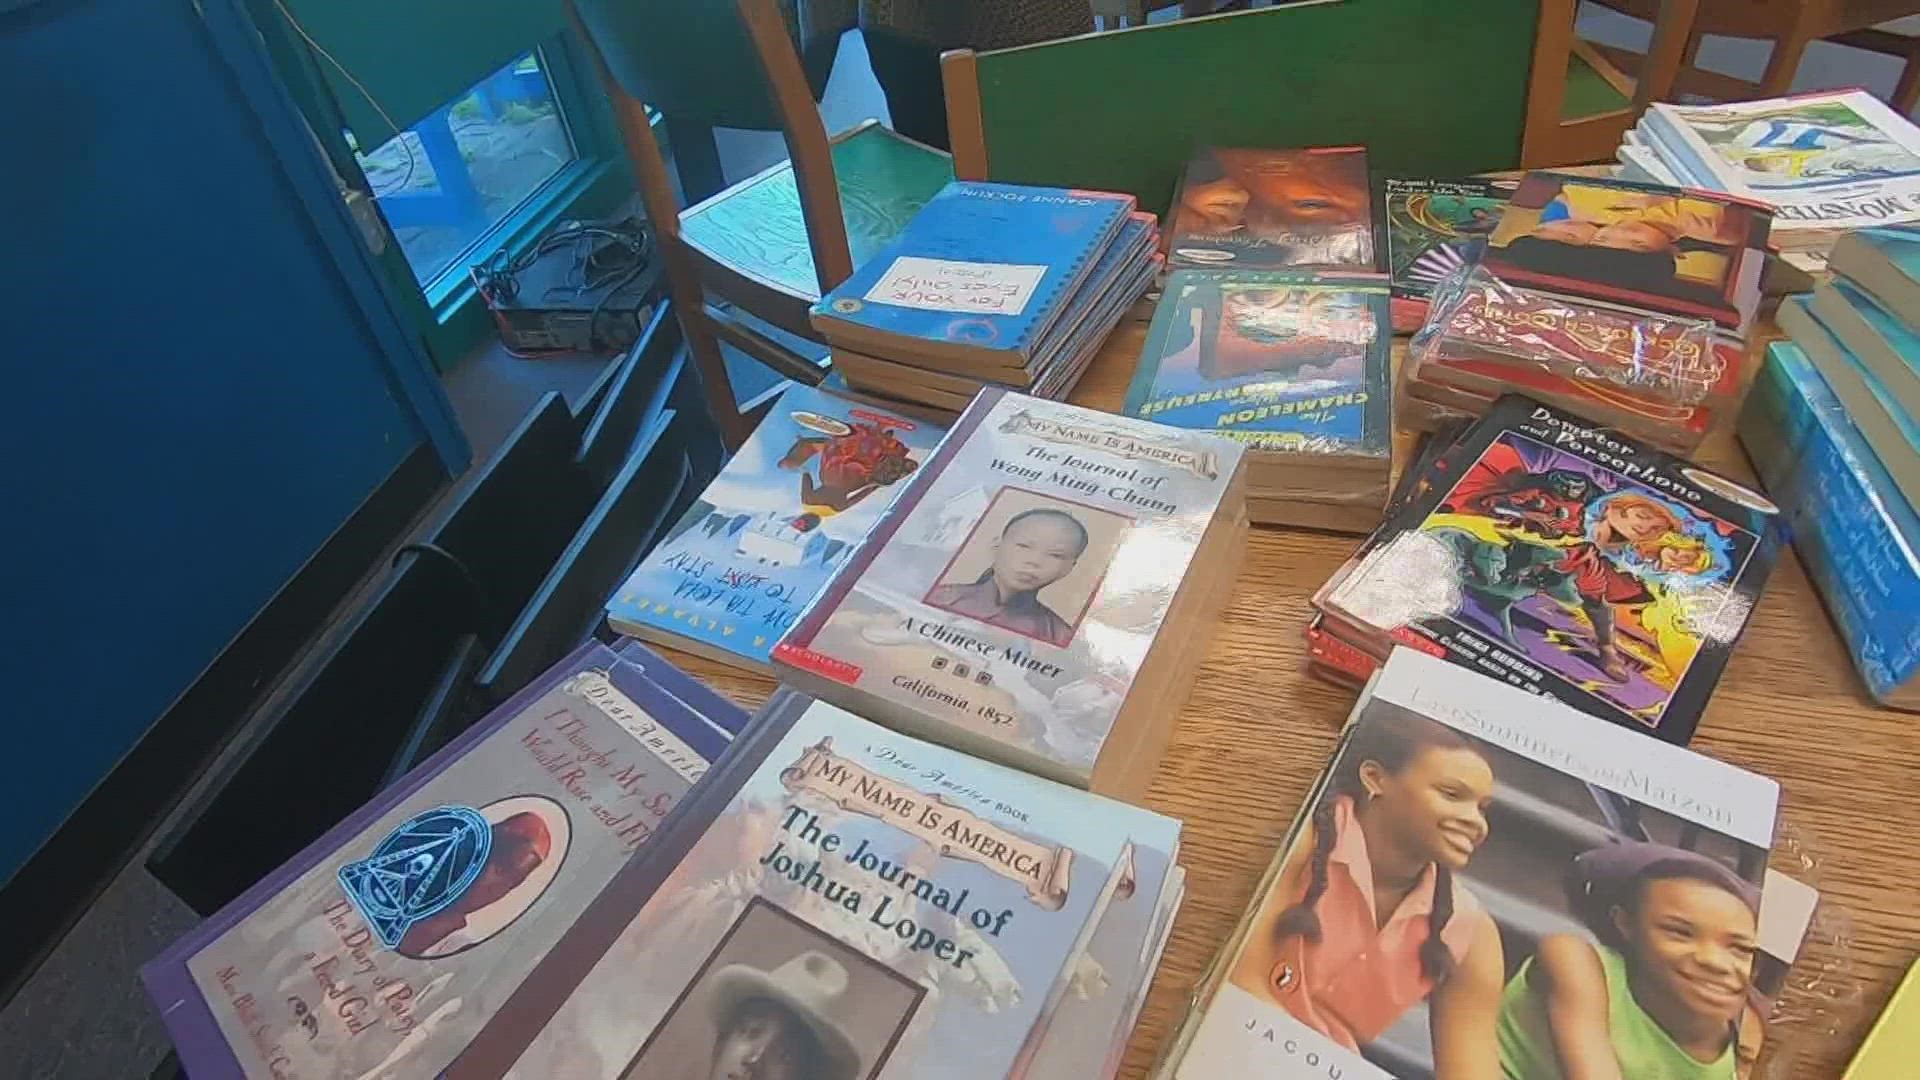 1,200 books were dropped off at every Portland public school on Thursday as part of a "Big Read" event.